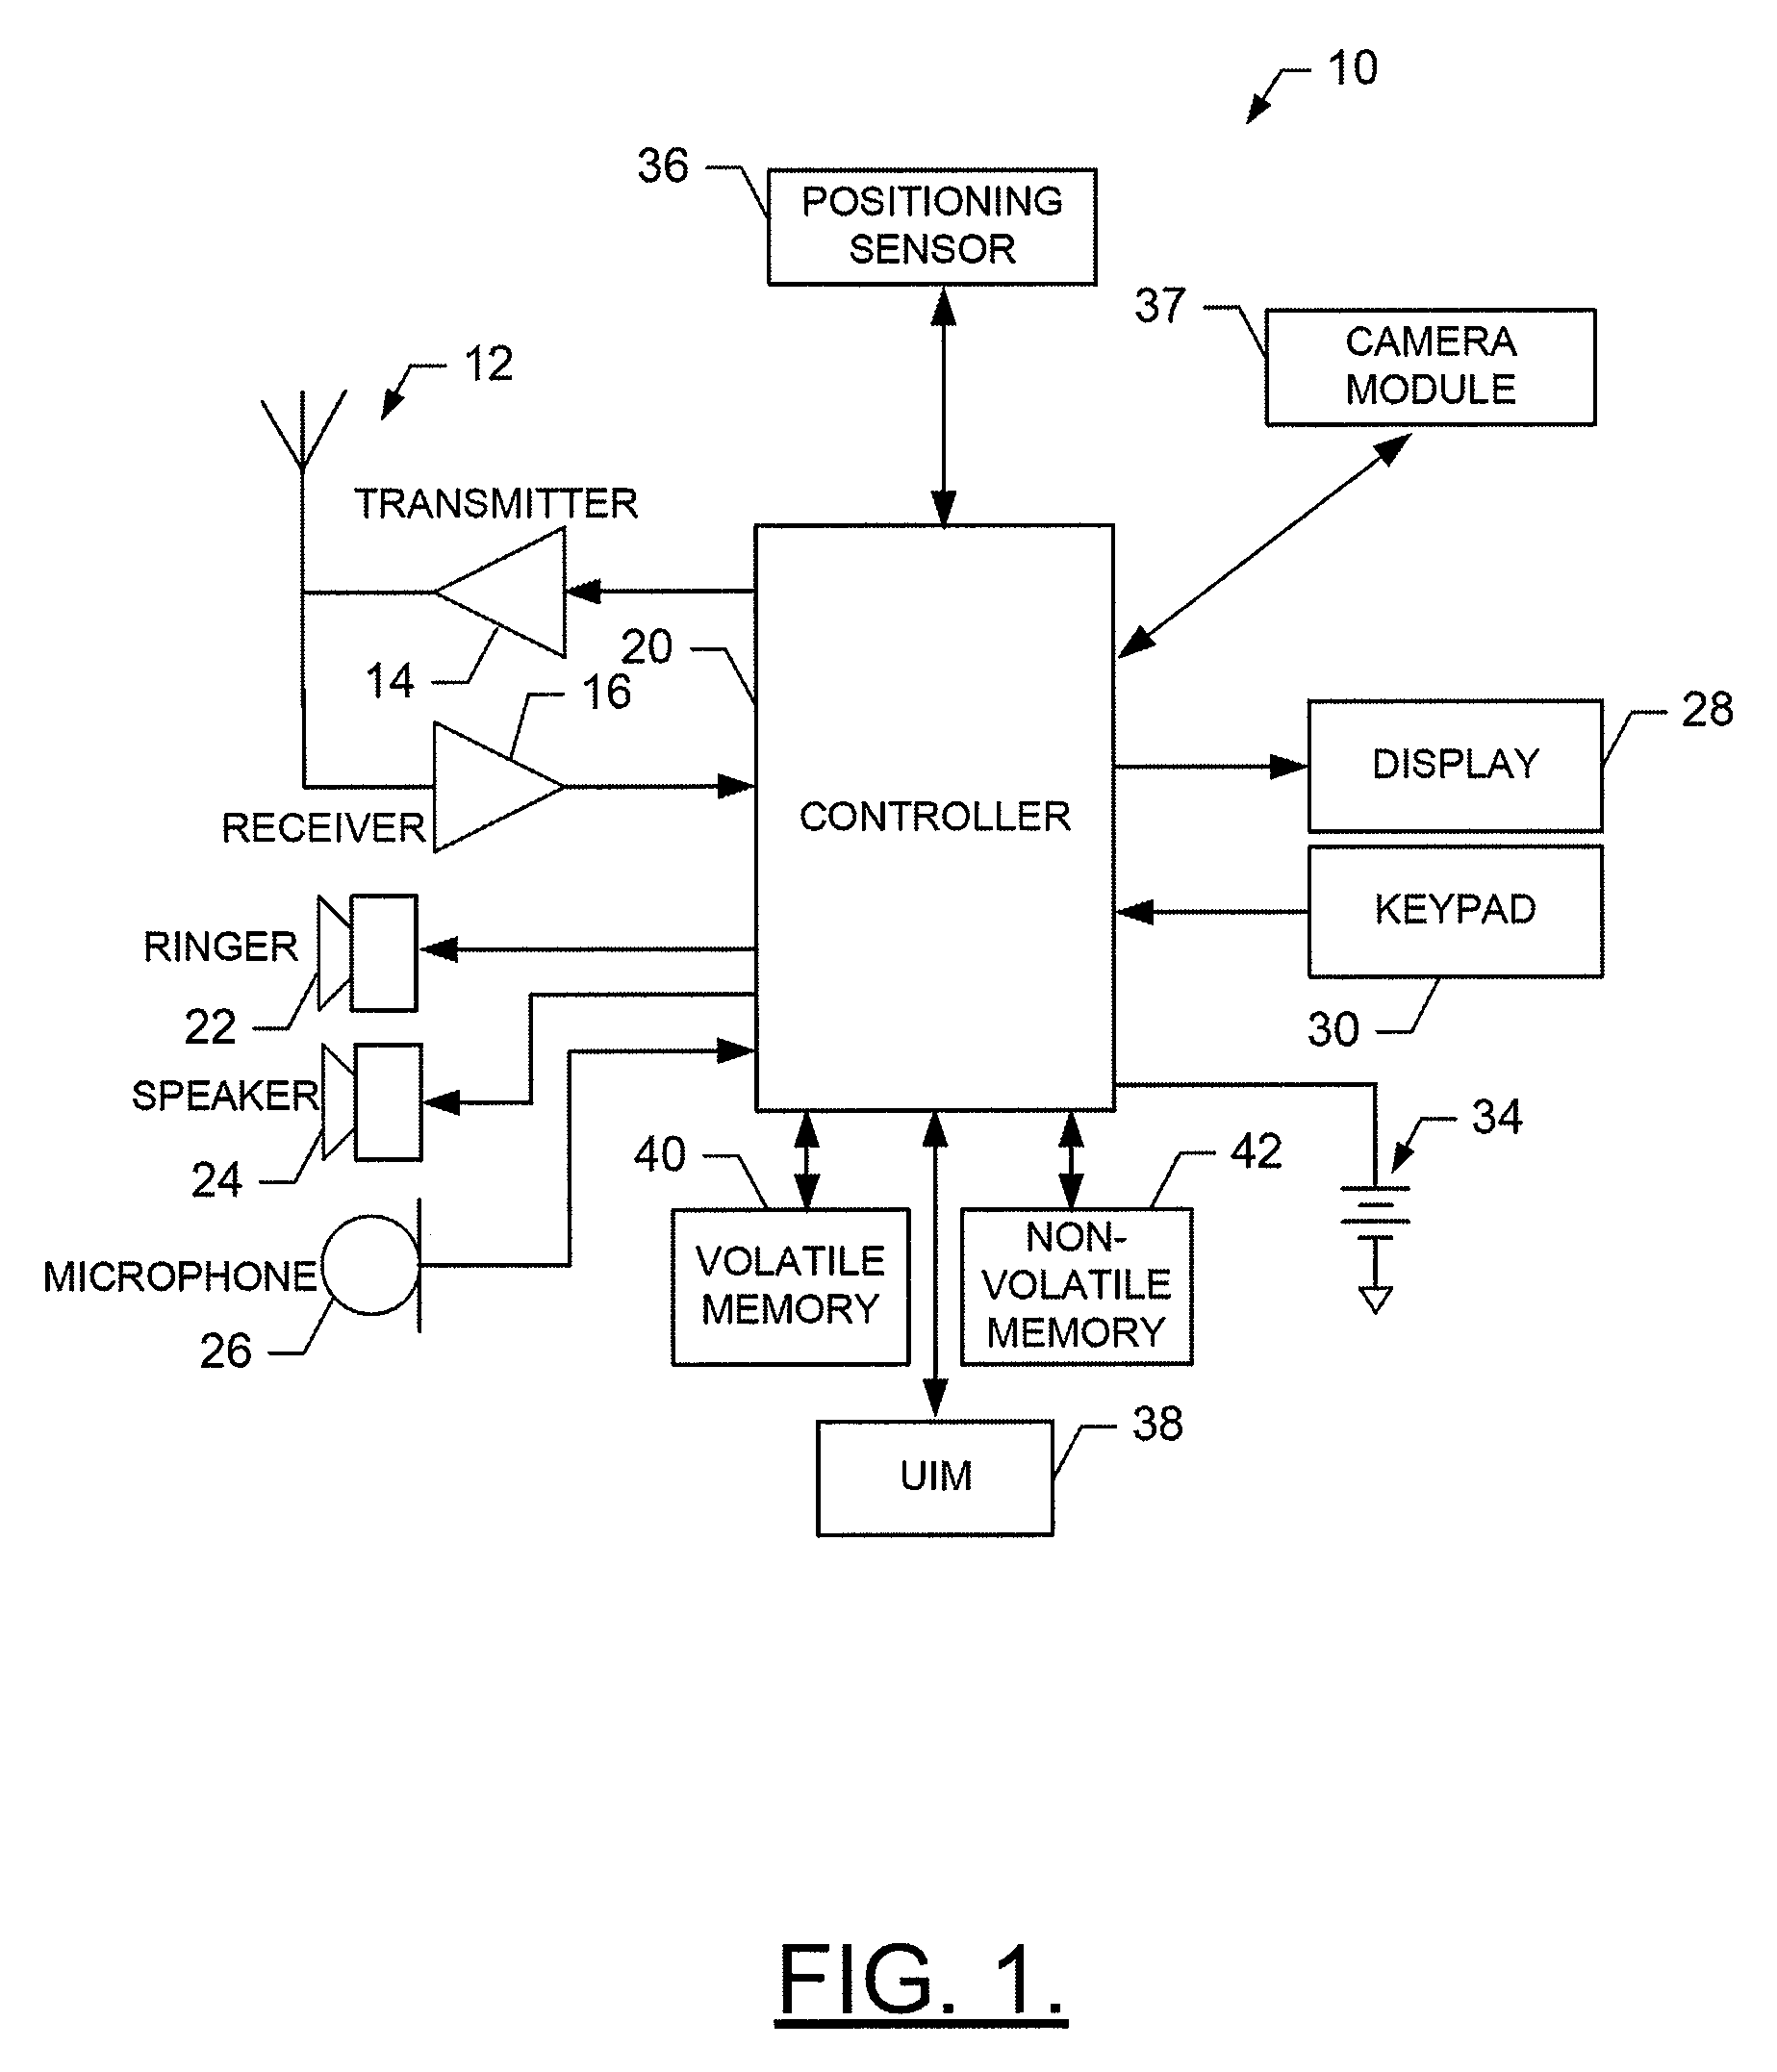 Method, Apparatus and Computer Program Product for Providing Content Tagging